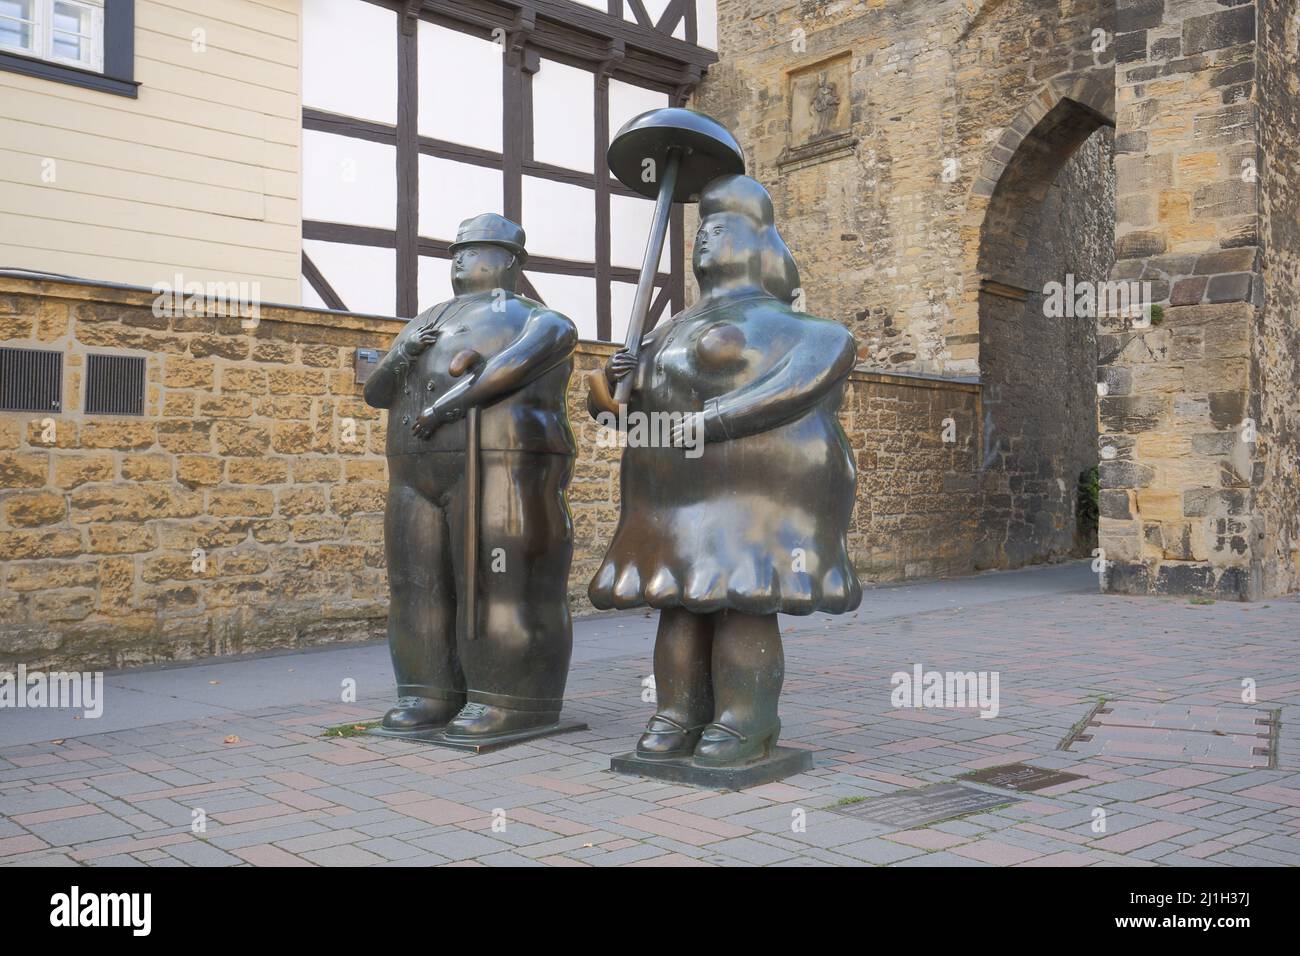 Sculptures at the Rosentor in Goslar, Lower Saxony, Germany Stock Photo